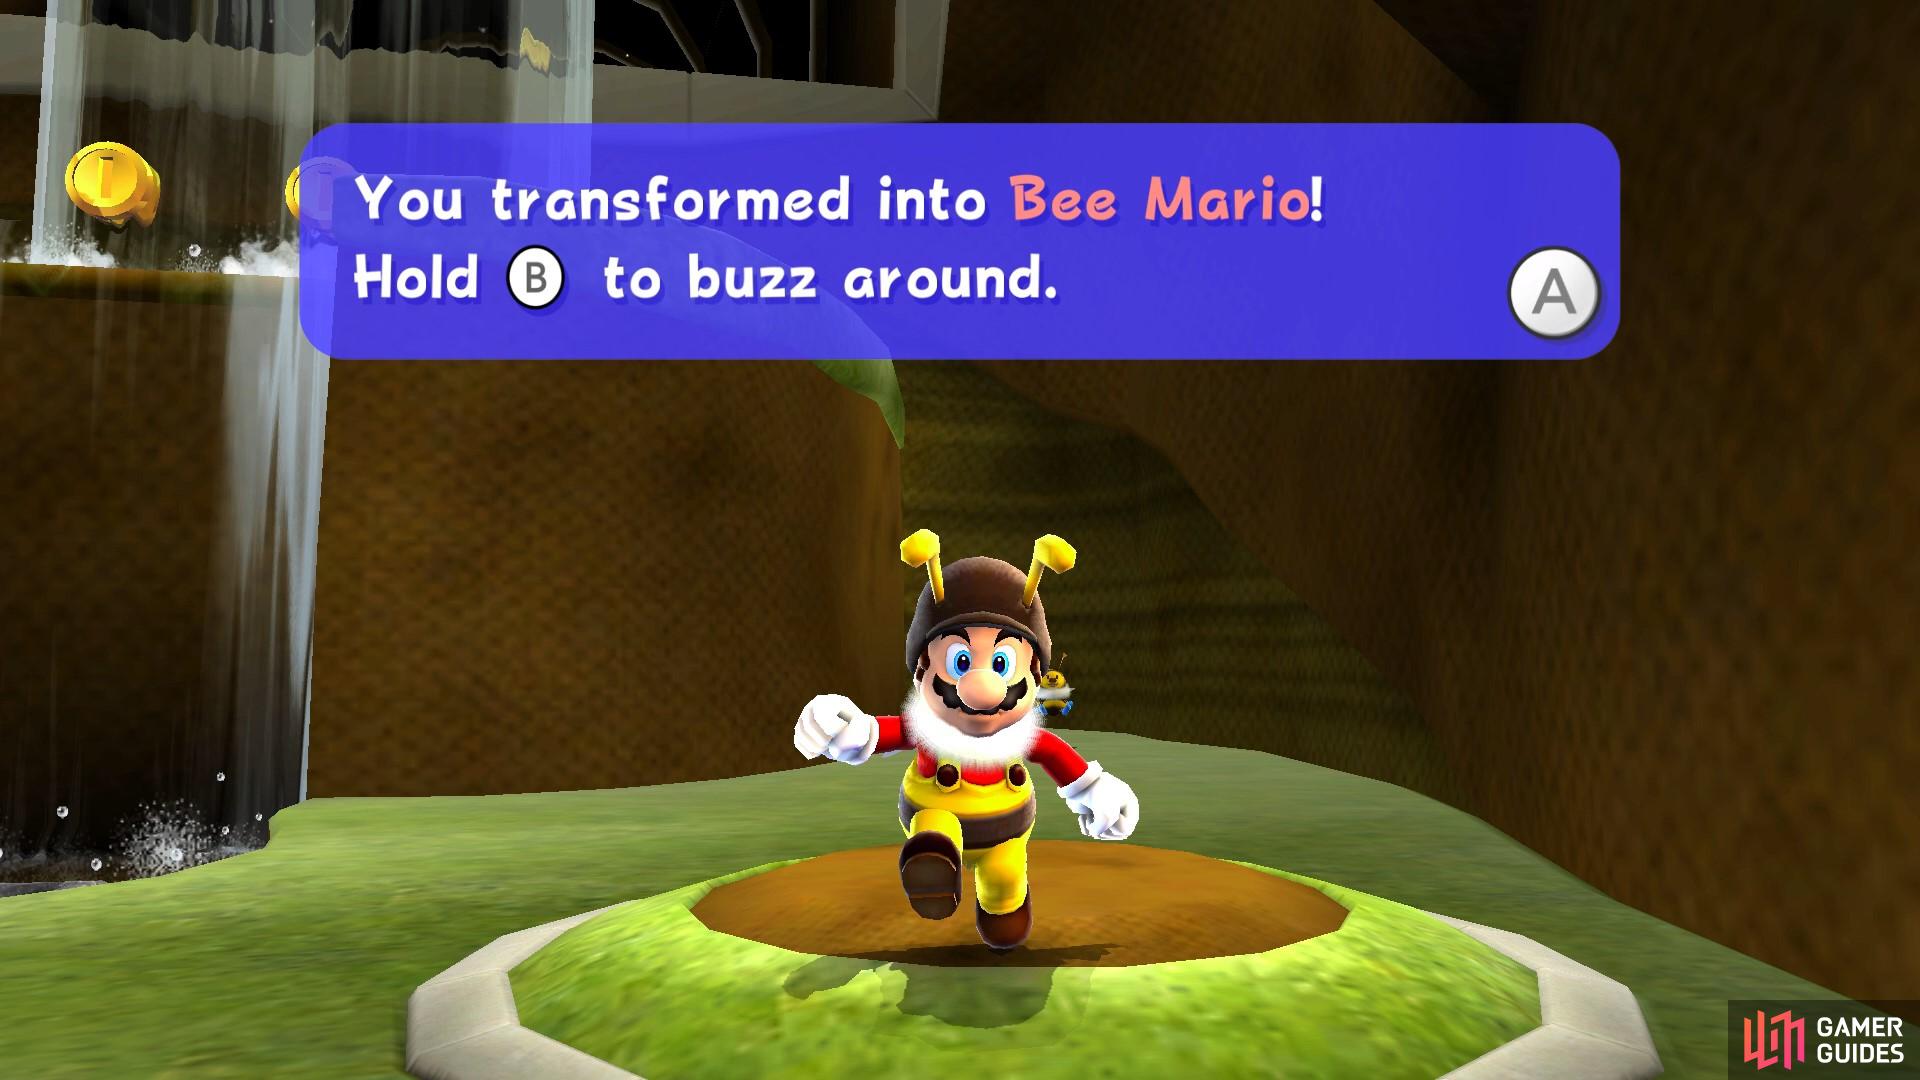 The first time we saw Bee Mario was in Honeyhive Galaxy!